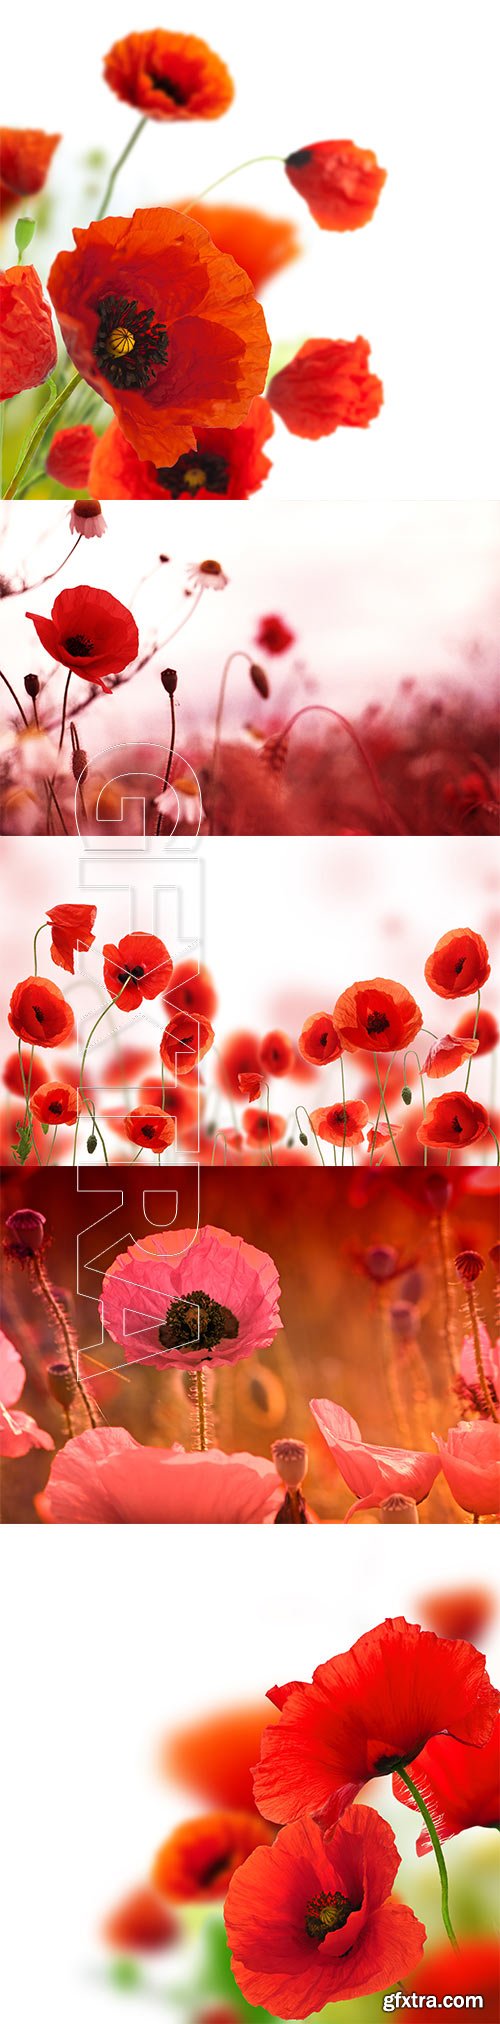 Poppies white background, green and red floral design